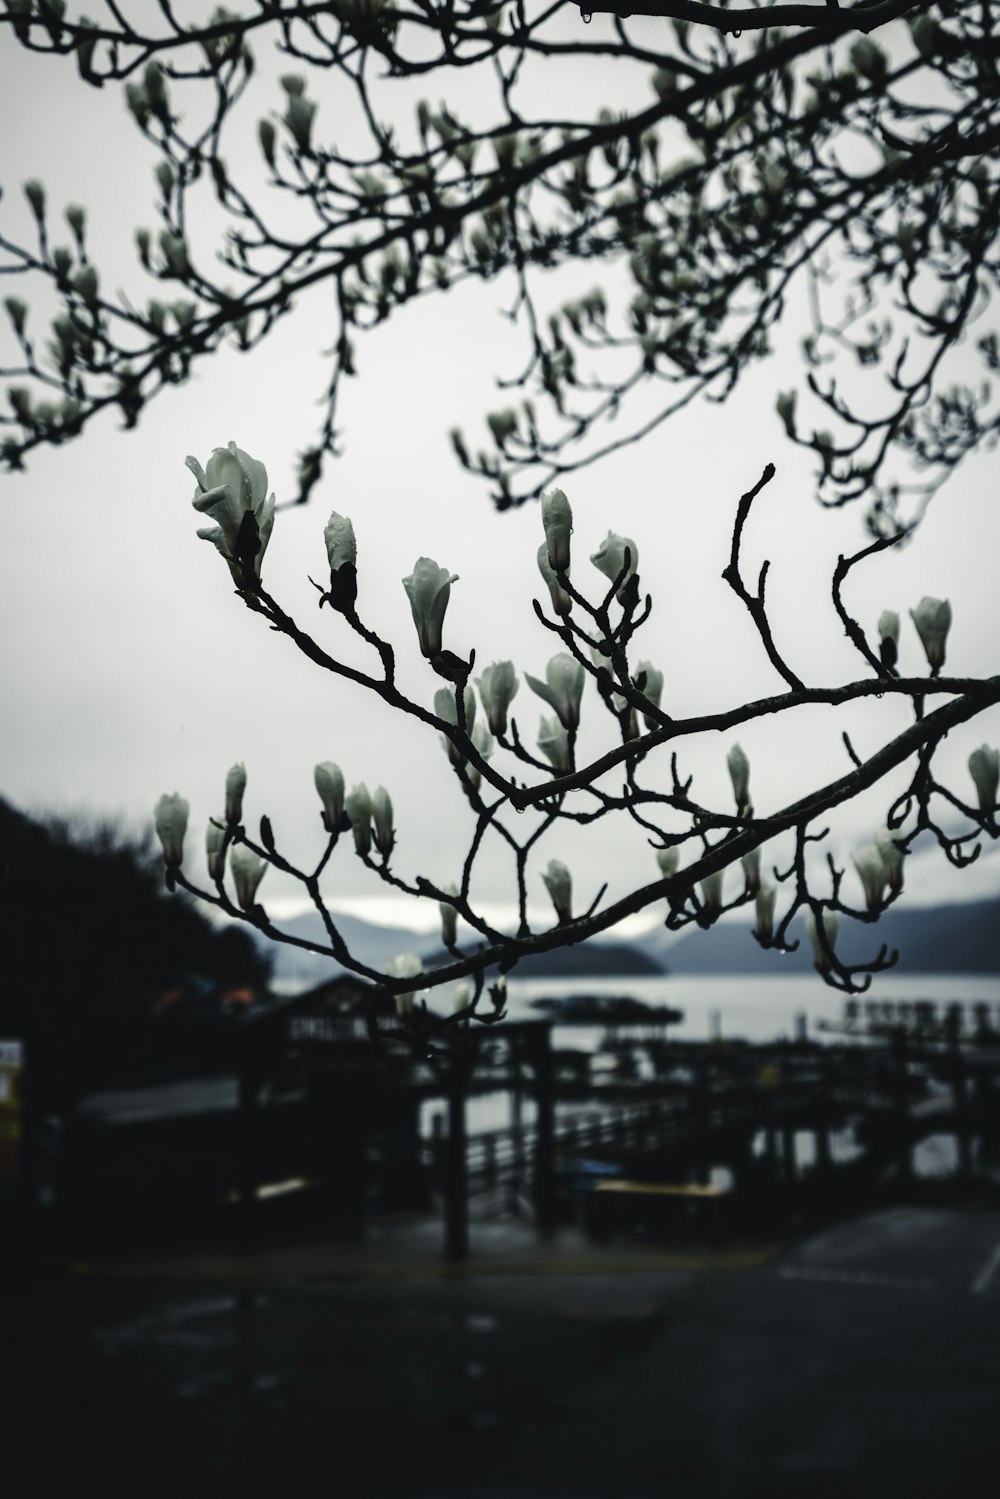 a tree with white flowers in front of a body of water